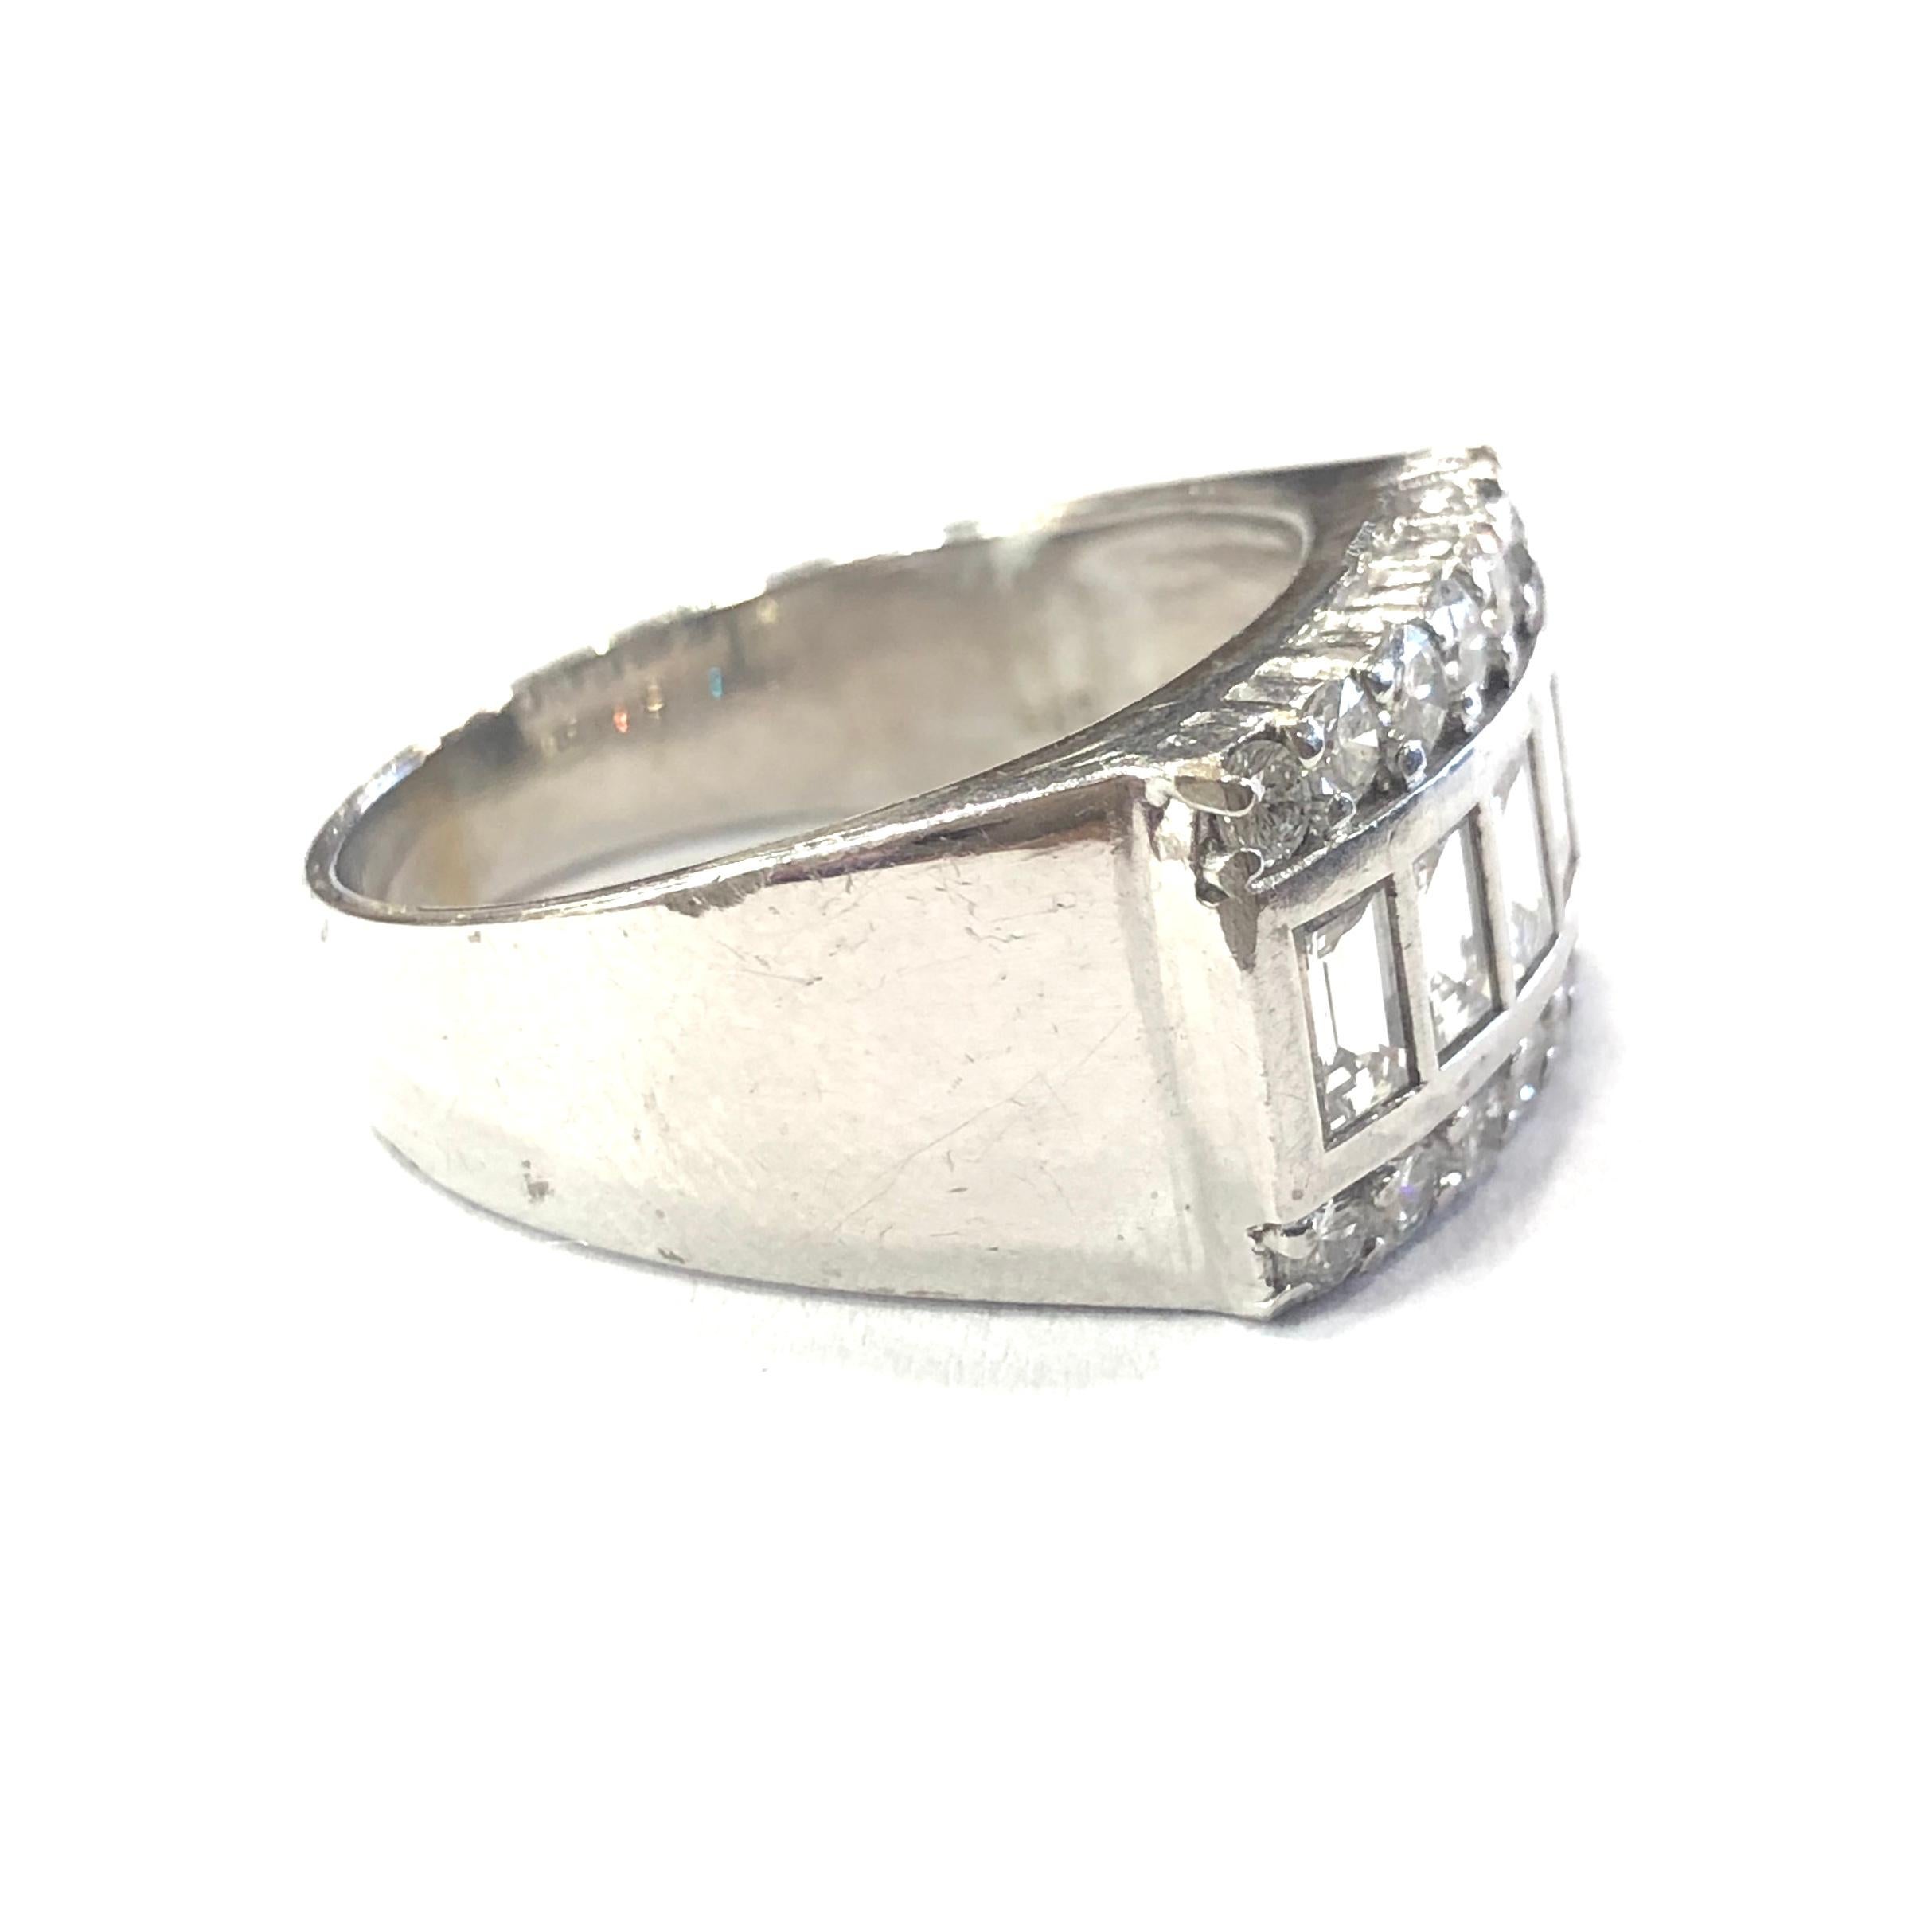 14ct White Gold Diamond Unisex Chunky Ring. Set with five central Baguette Diamonds in a rubover setting, and two rows of seven round brilliant cut Diamonds either side in a peg setting. 

Approximate total Diamond weight : 2.50ct
Total weight :